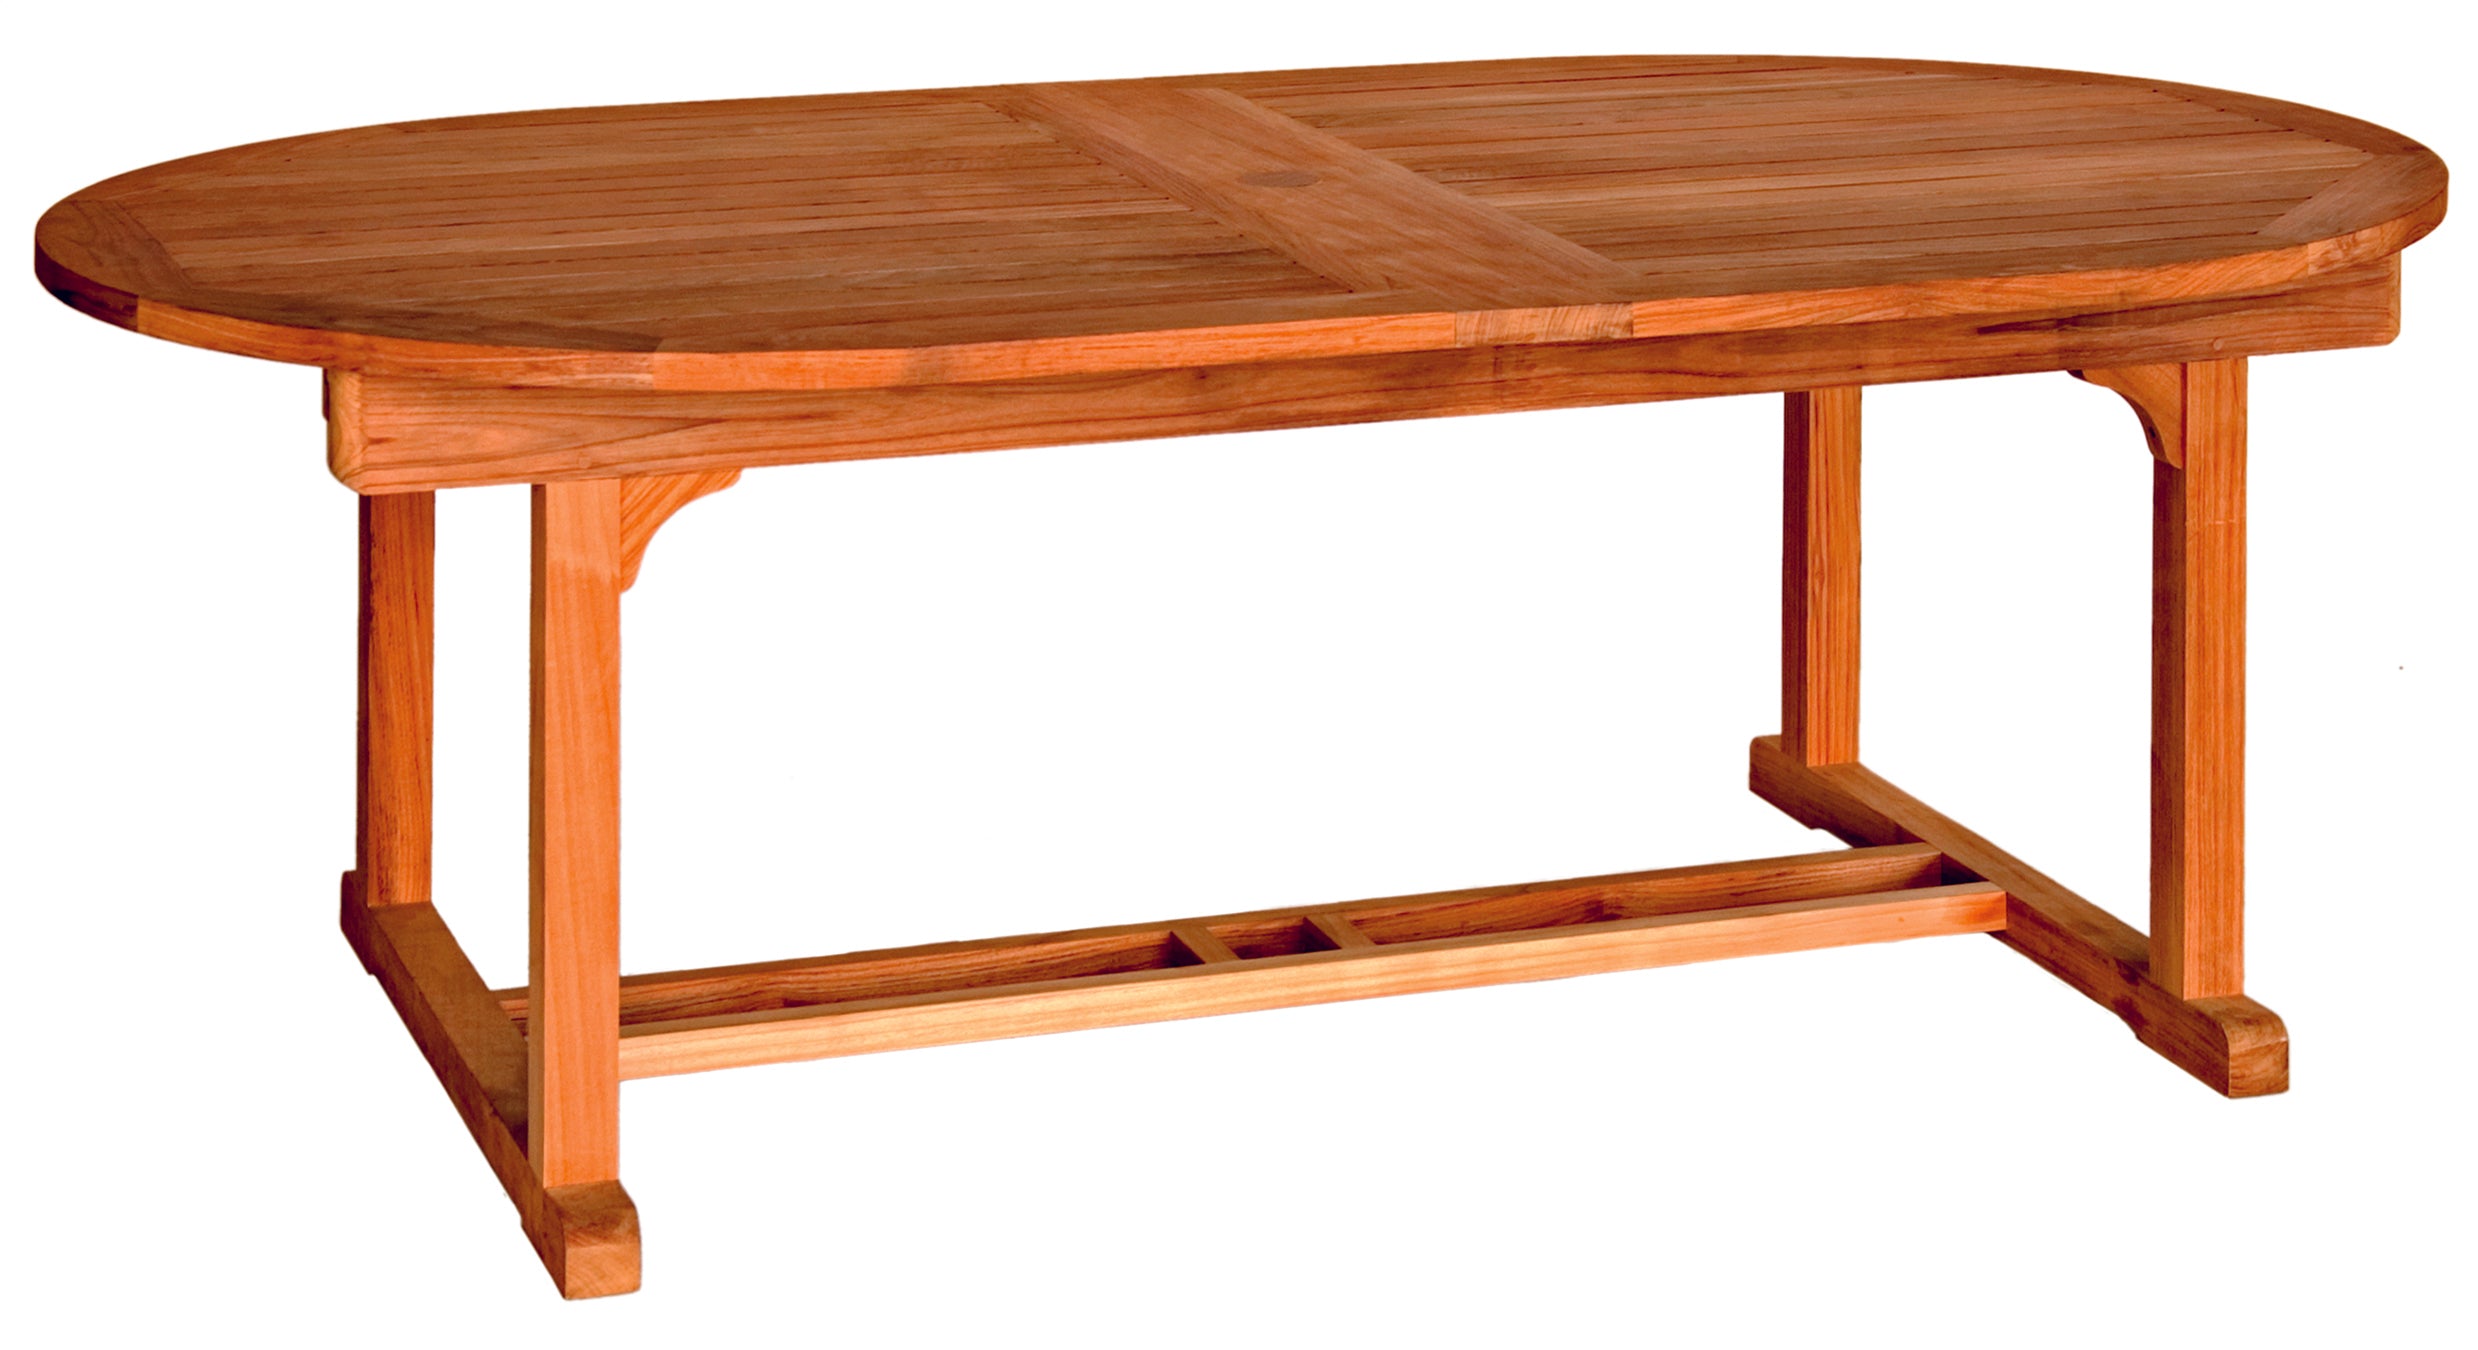 Chelsea Oval Extension Table 80" - 115"